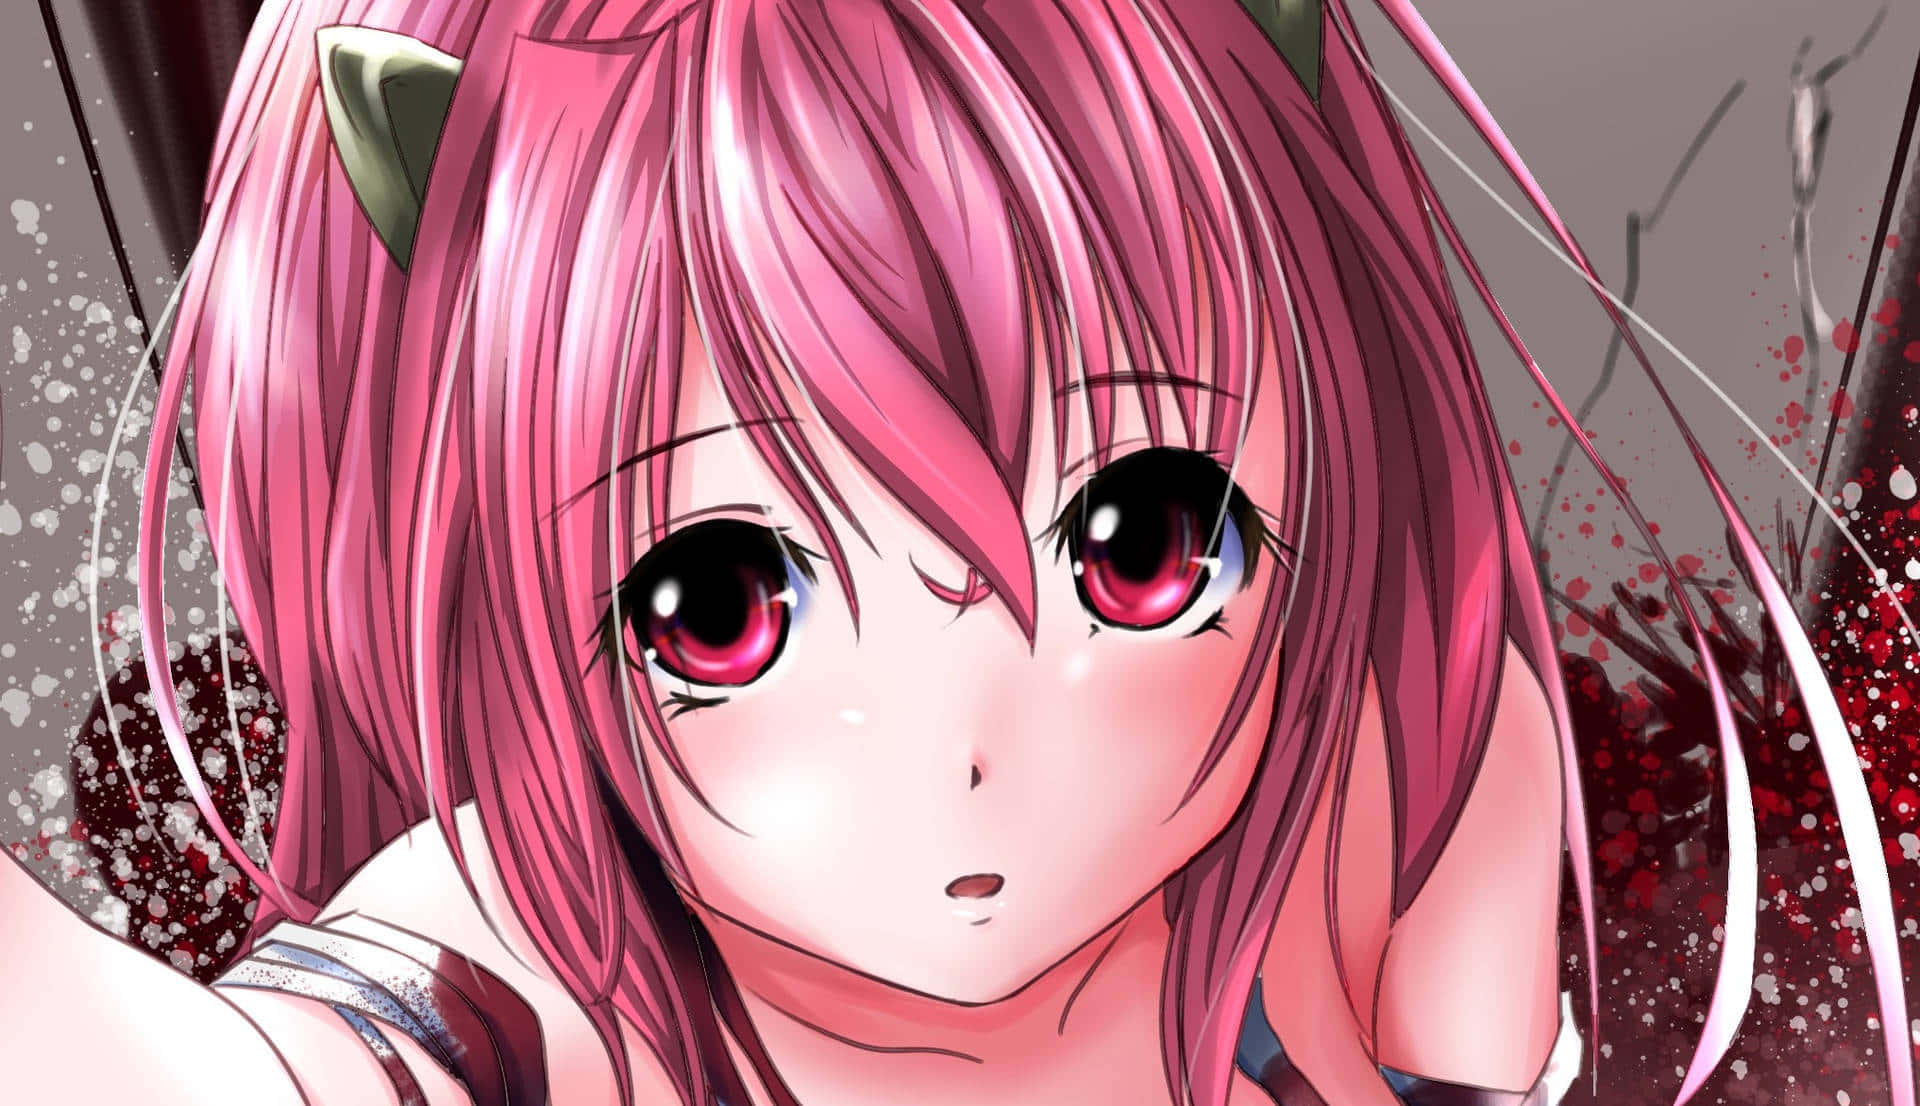 Lucy From Elfen Lied Anime Series Wallpaper